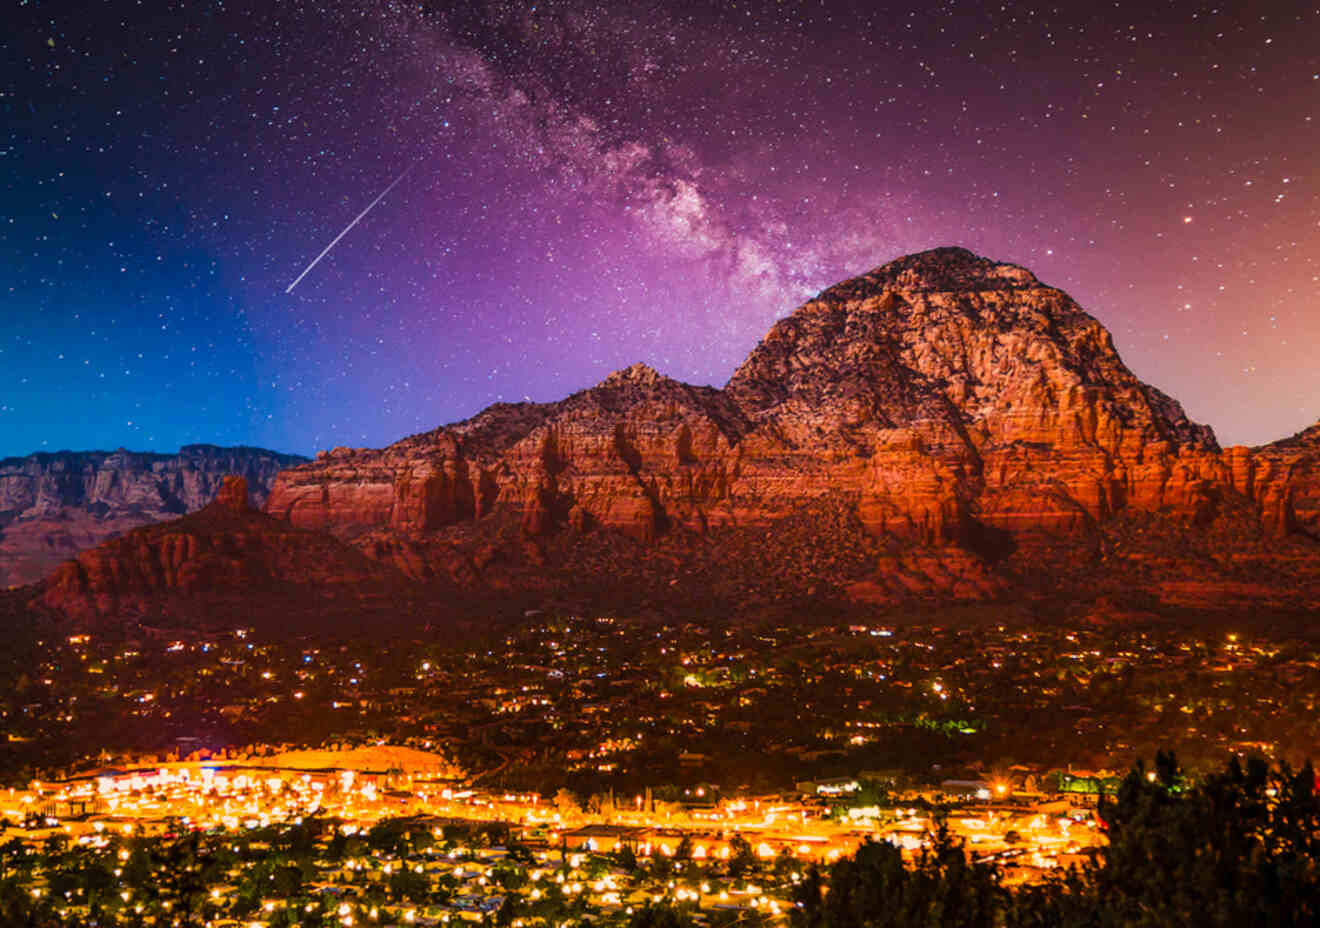 a night time view of a mountain with a star filled sky